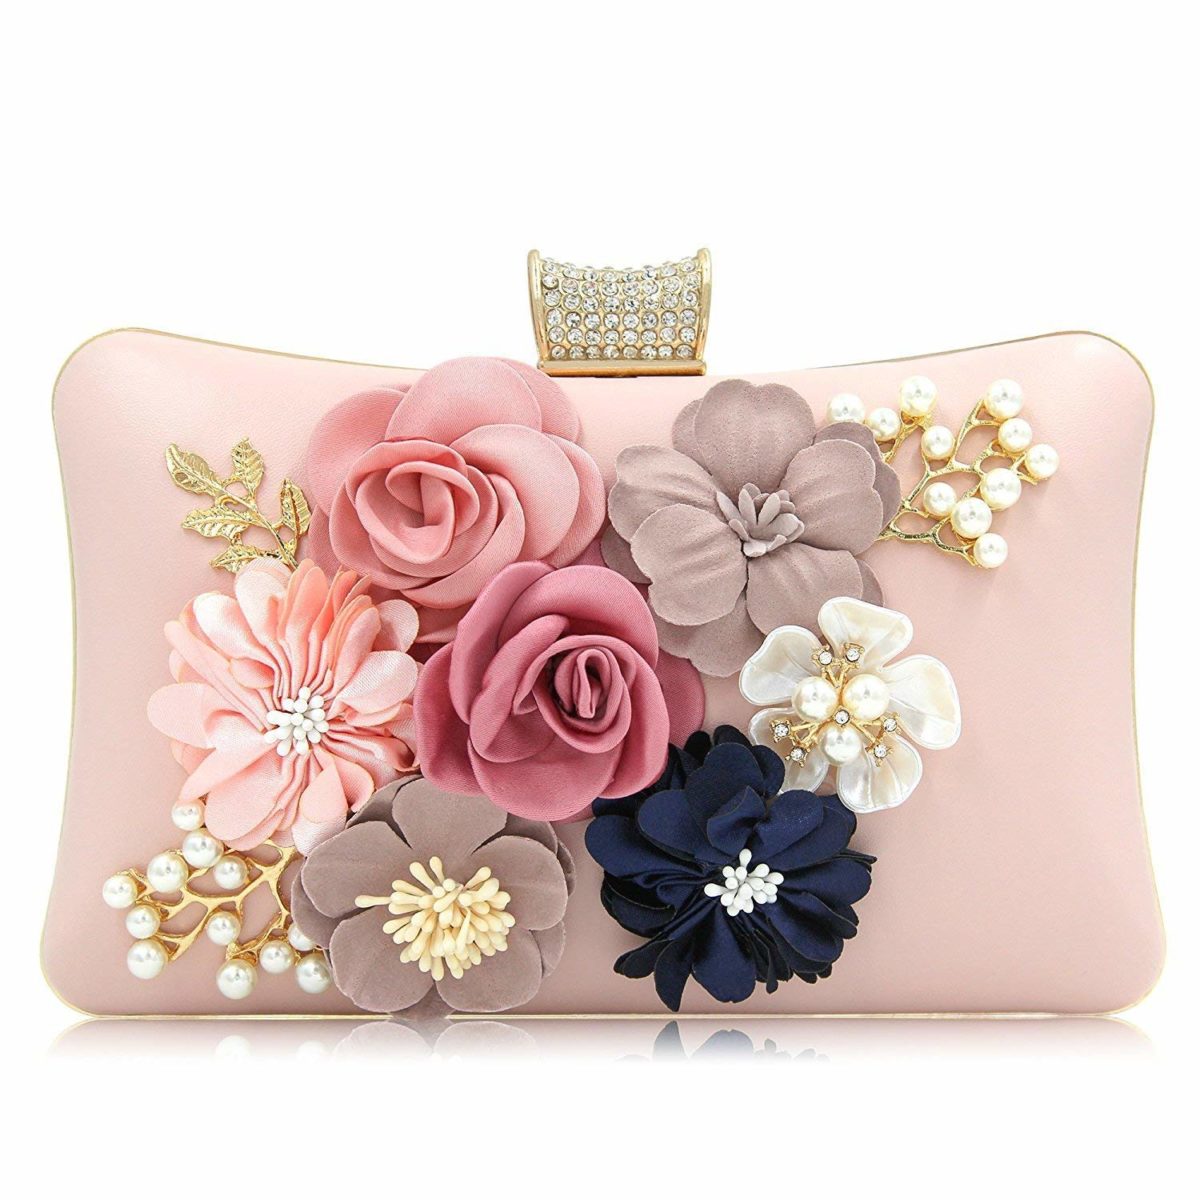 Stylish Wallets or Clutches